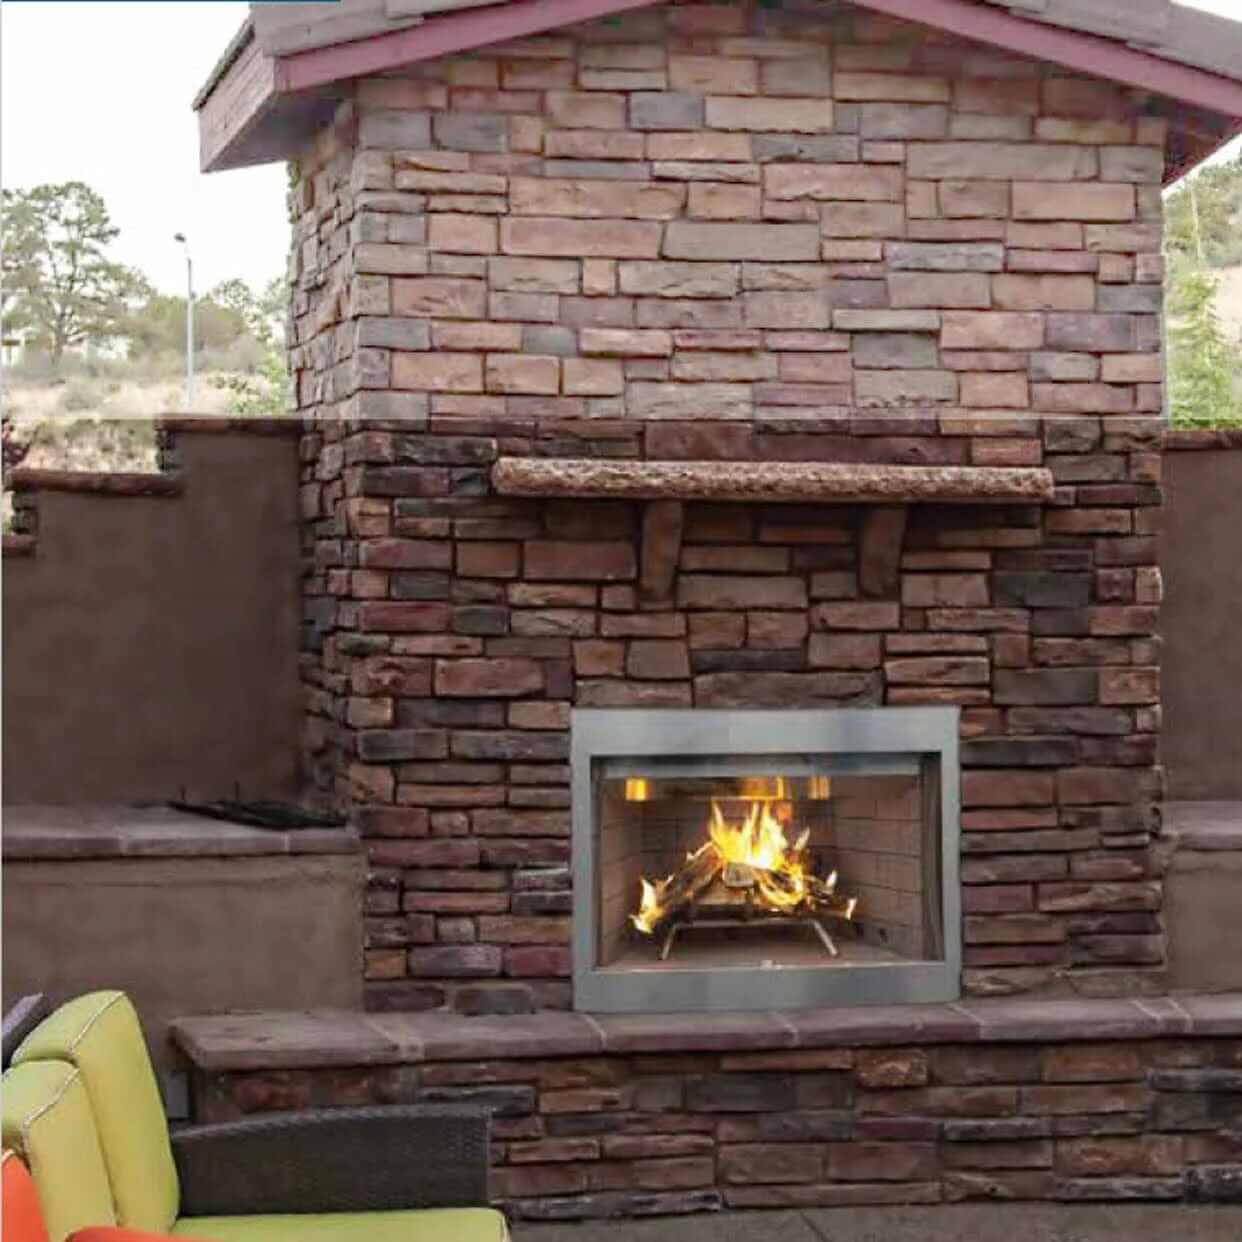 Best outdoor Fireplaces: Best Traditional - Superior WRE4500 36" Traditional Wood Burning Outdoor Fireplace WRE4536W